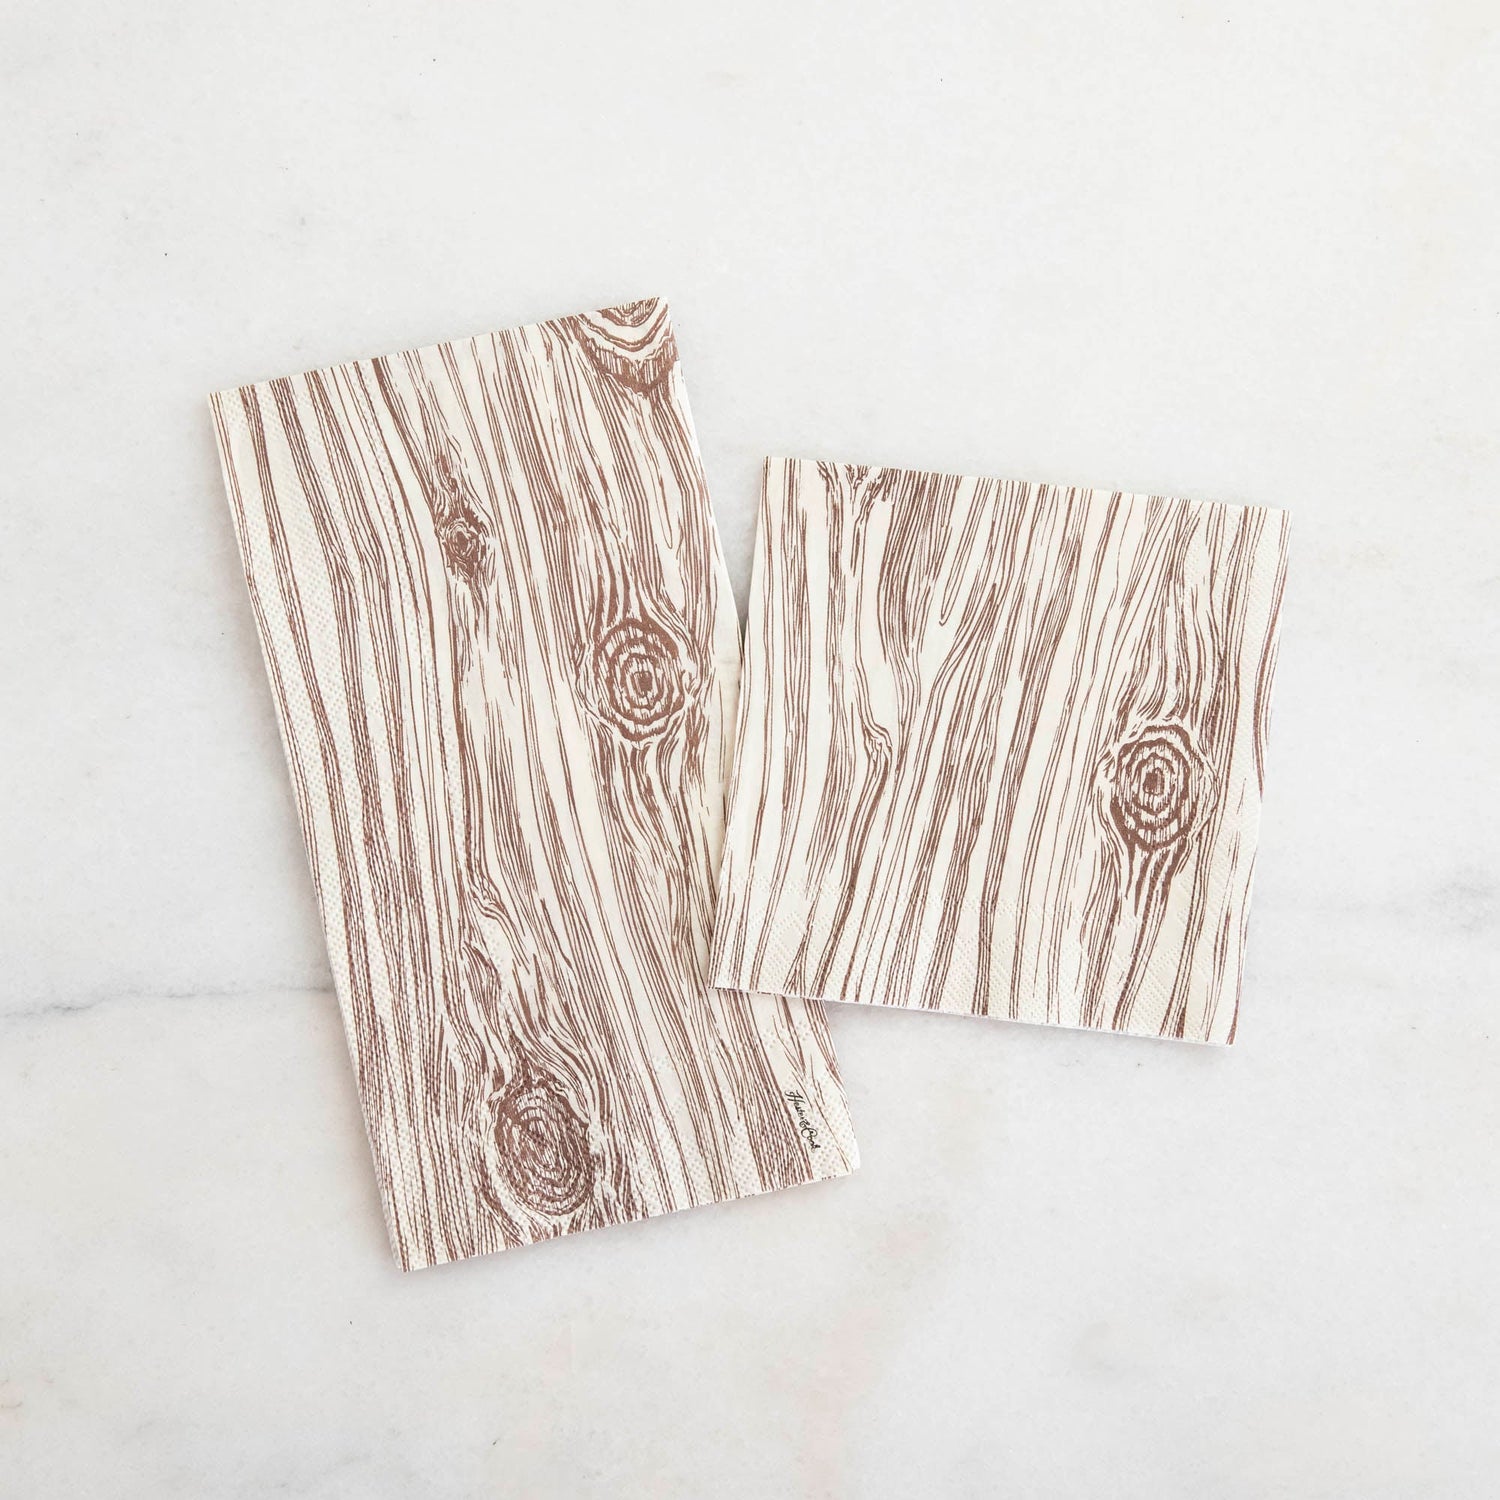 Two Oak Napkins, one Guest and one Cocktail, on a white marble table from above.